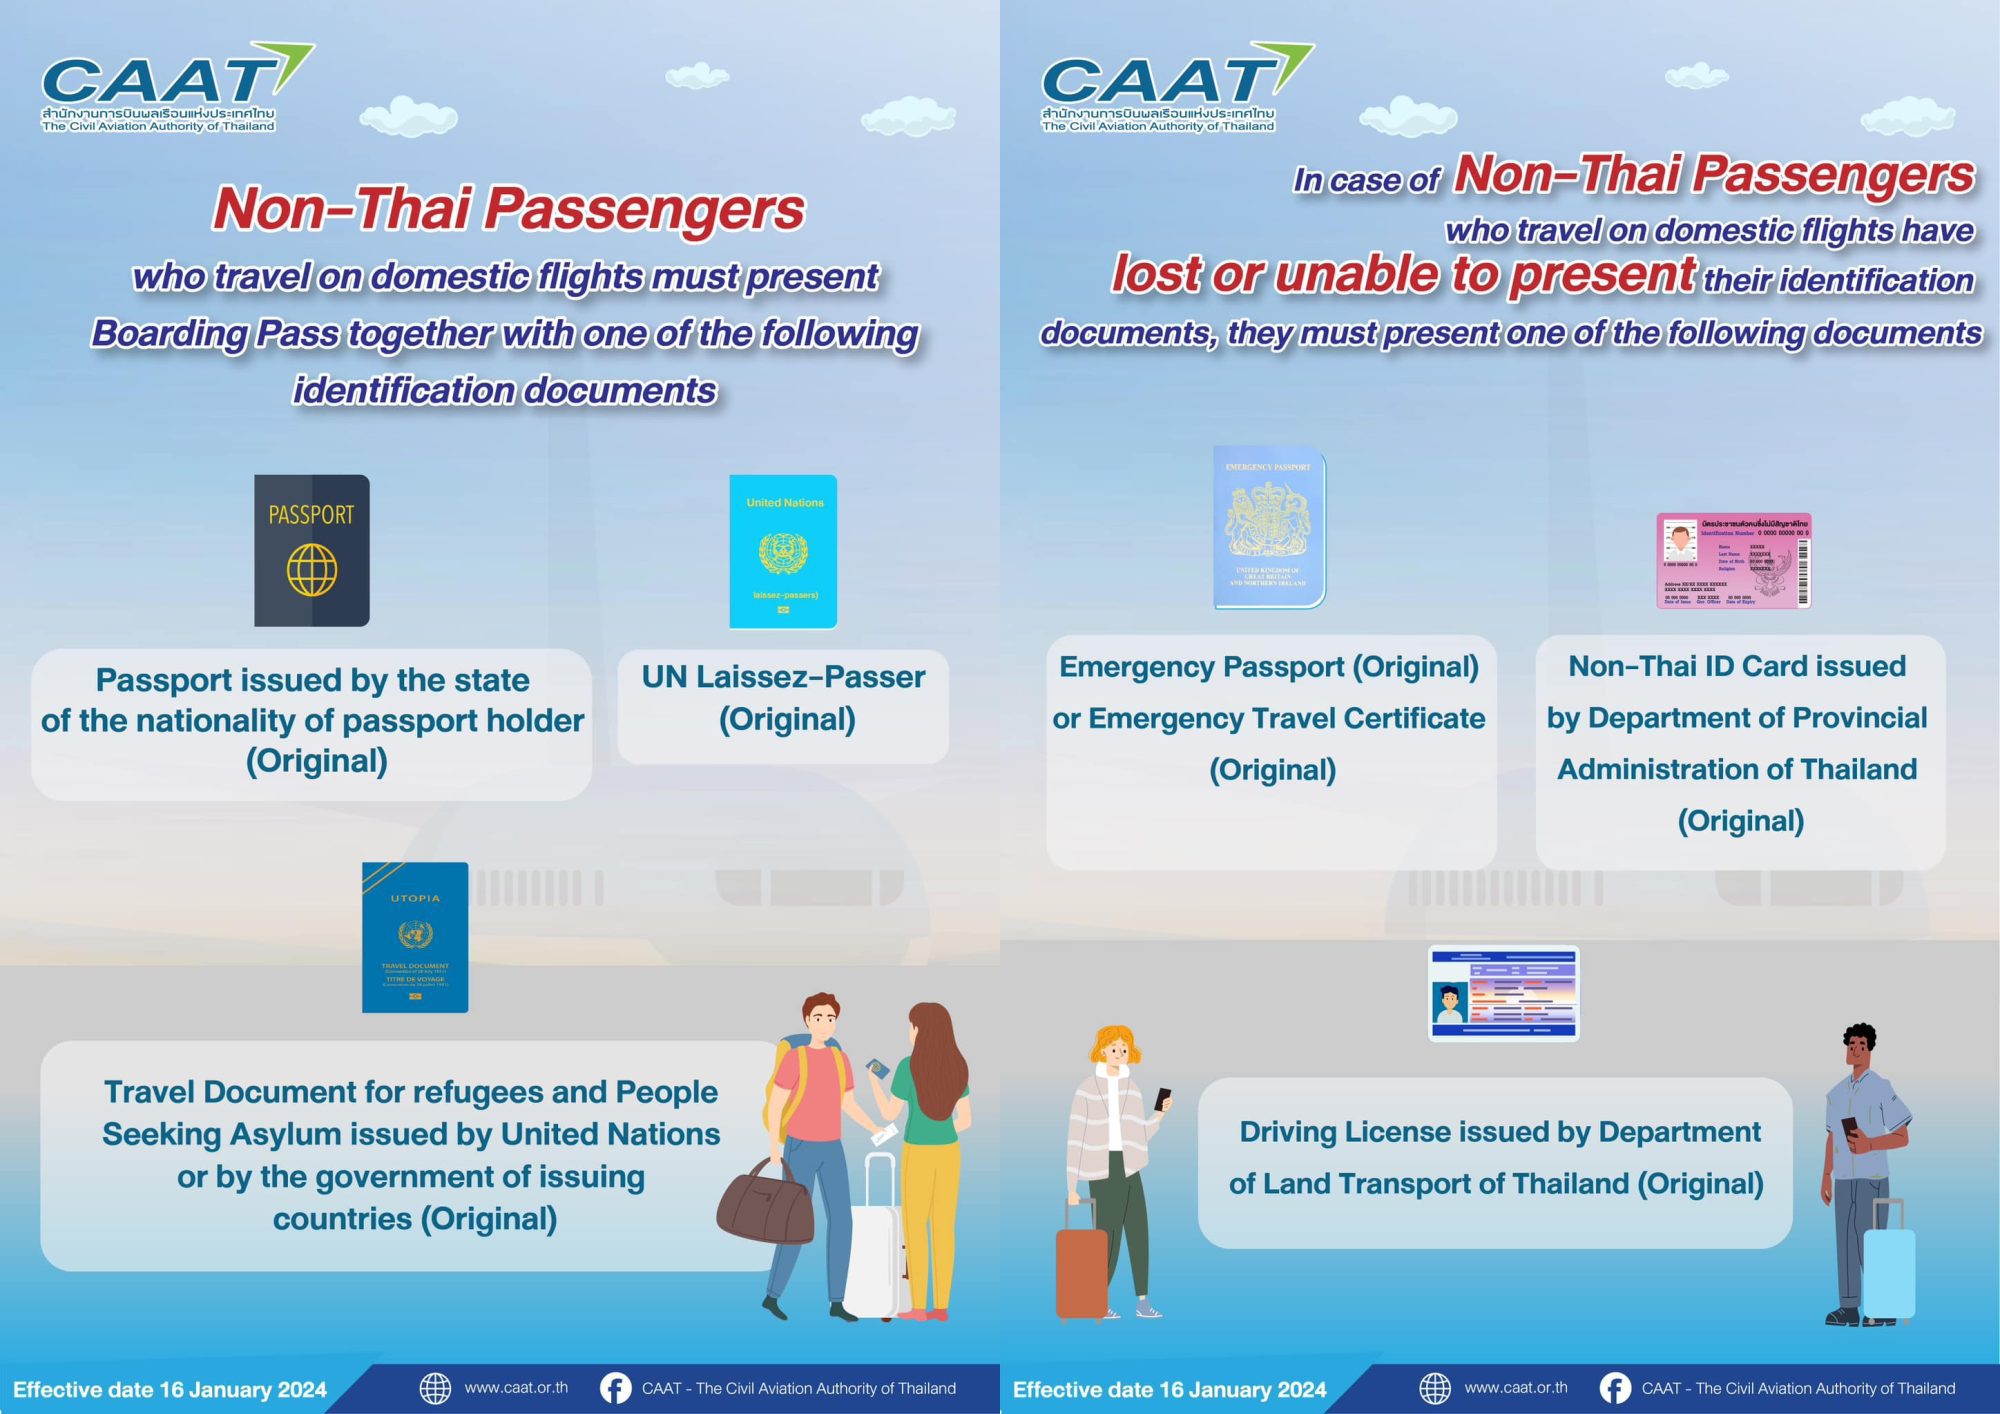 Passports required to be shown on domestic flights for foreigners